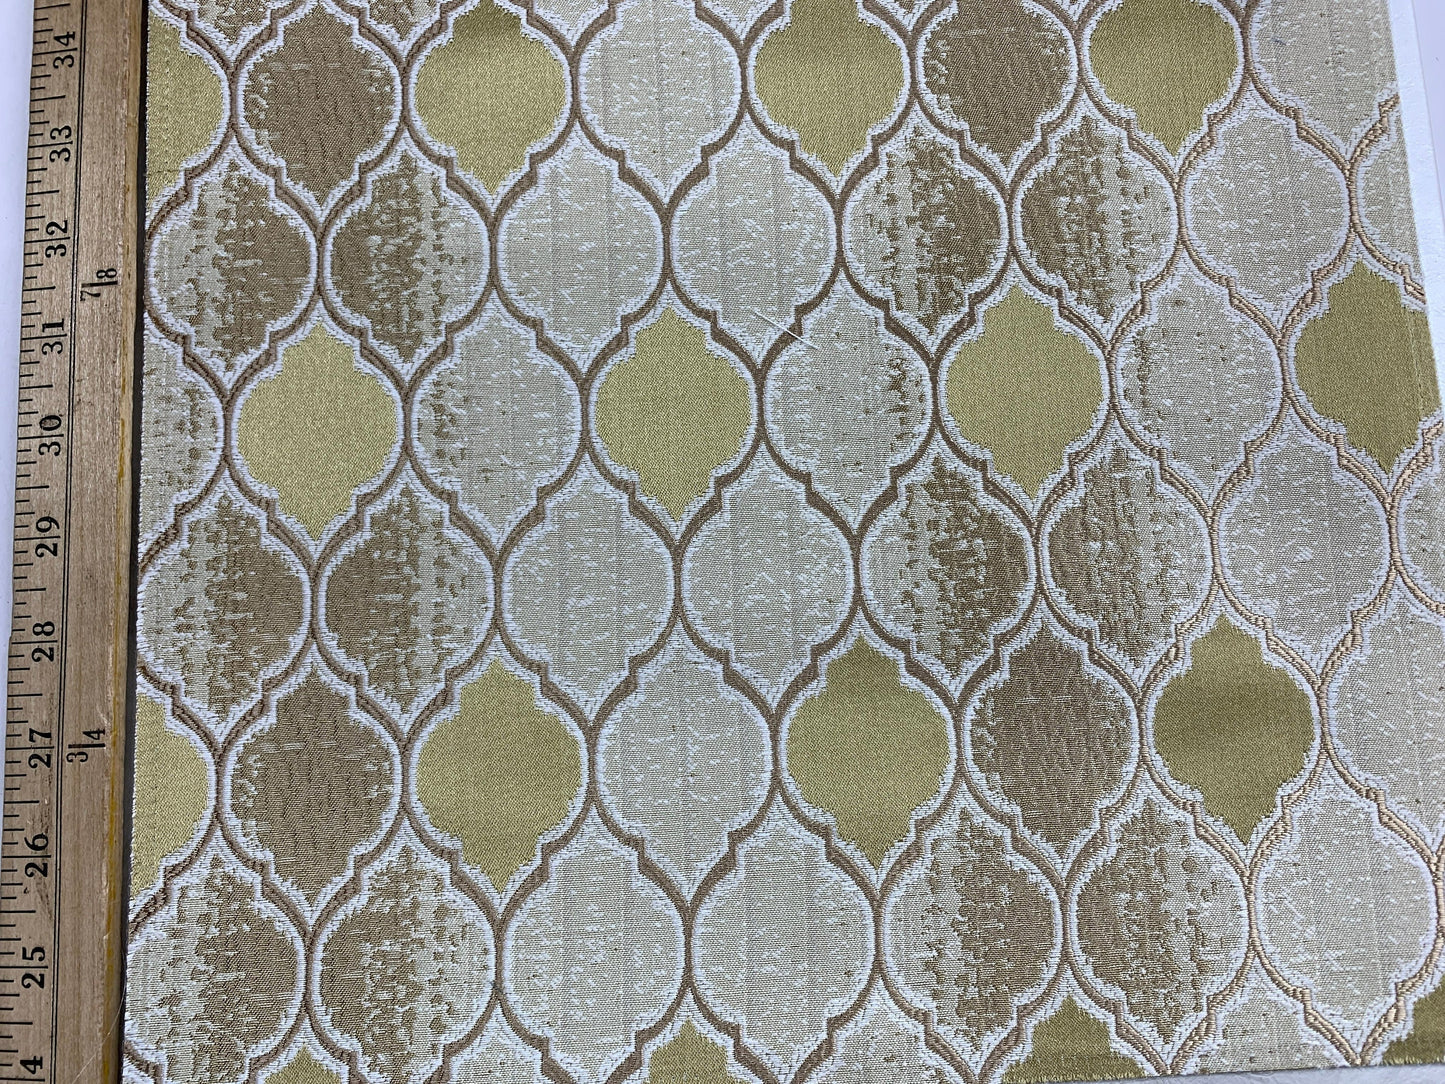 GOLD Trellis Brocade Upholstery Drapery Fabric (110 in.) Sold By The Yard